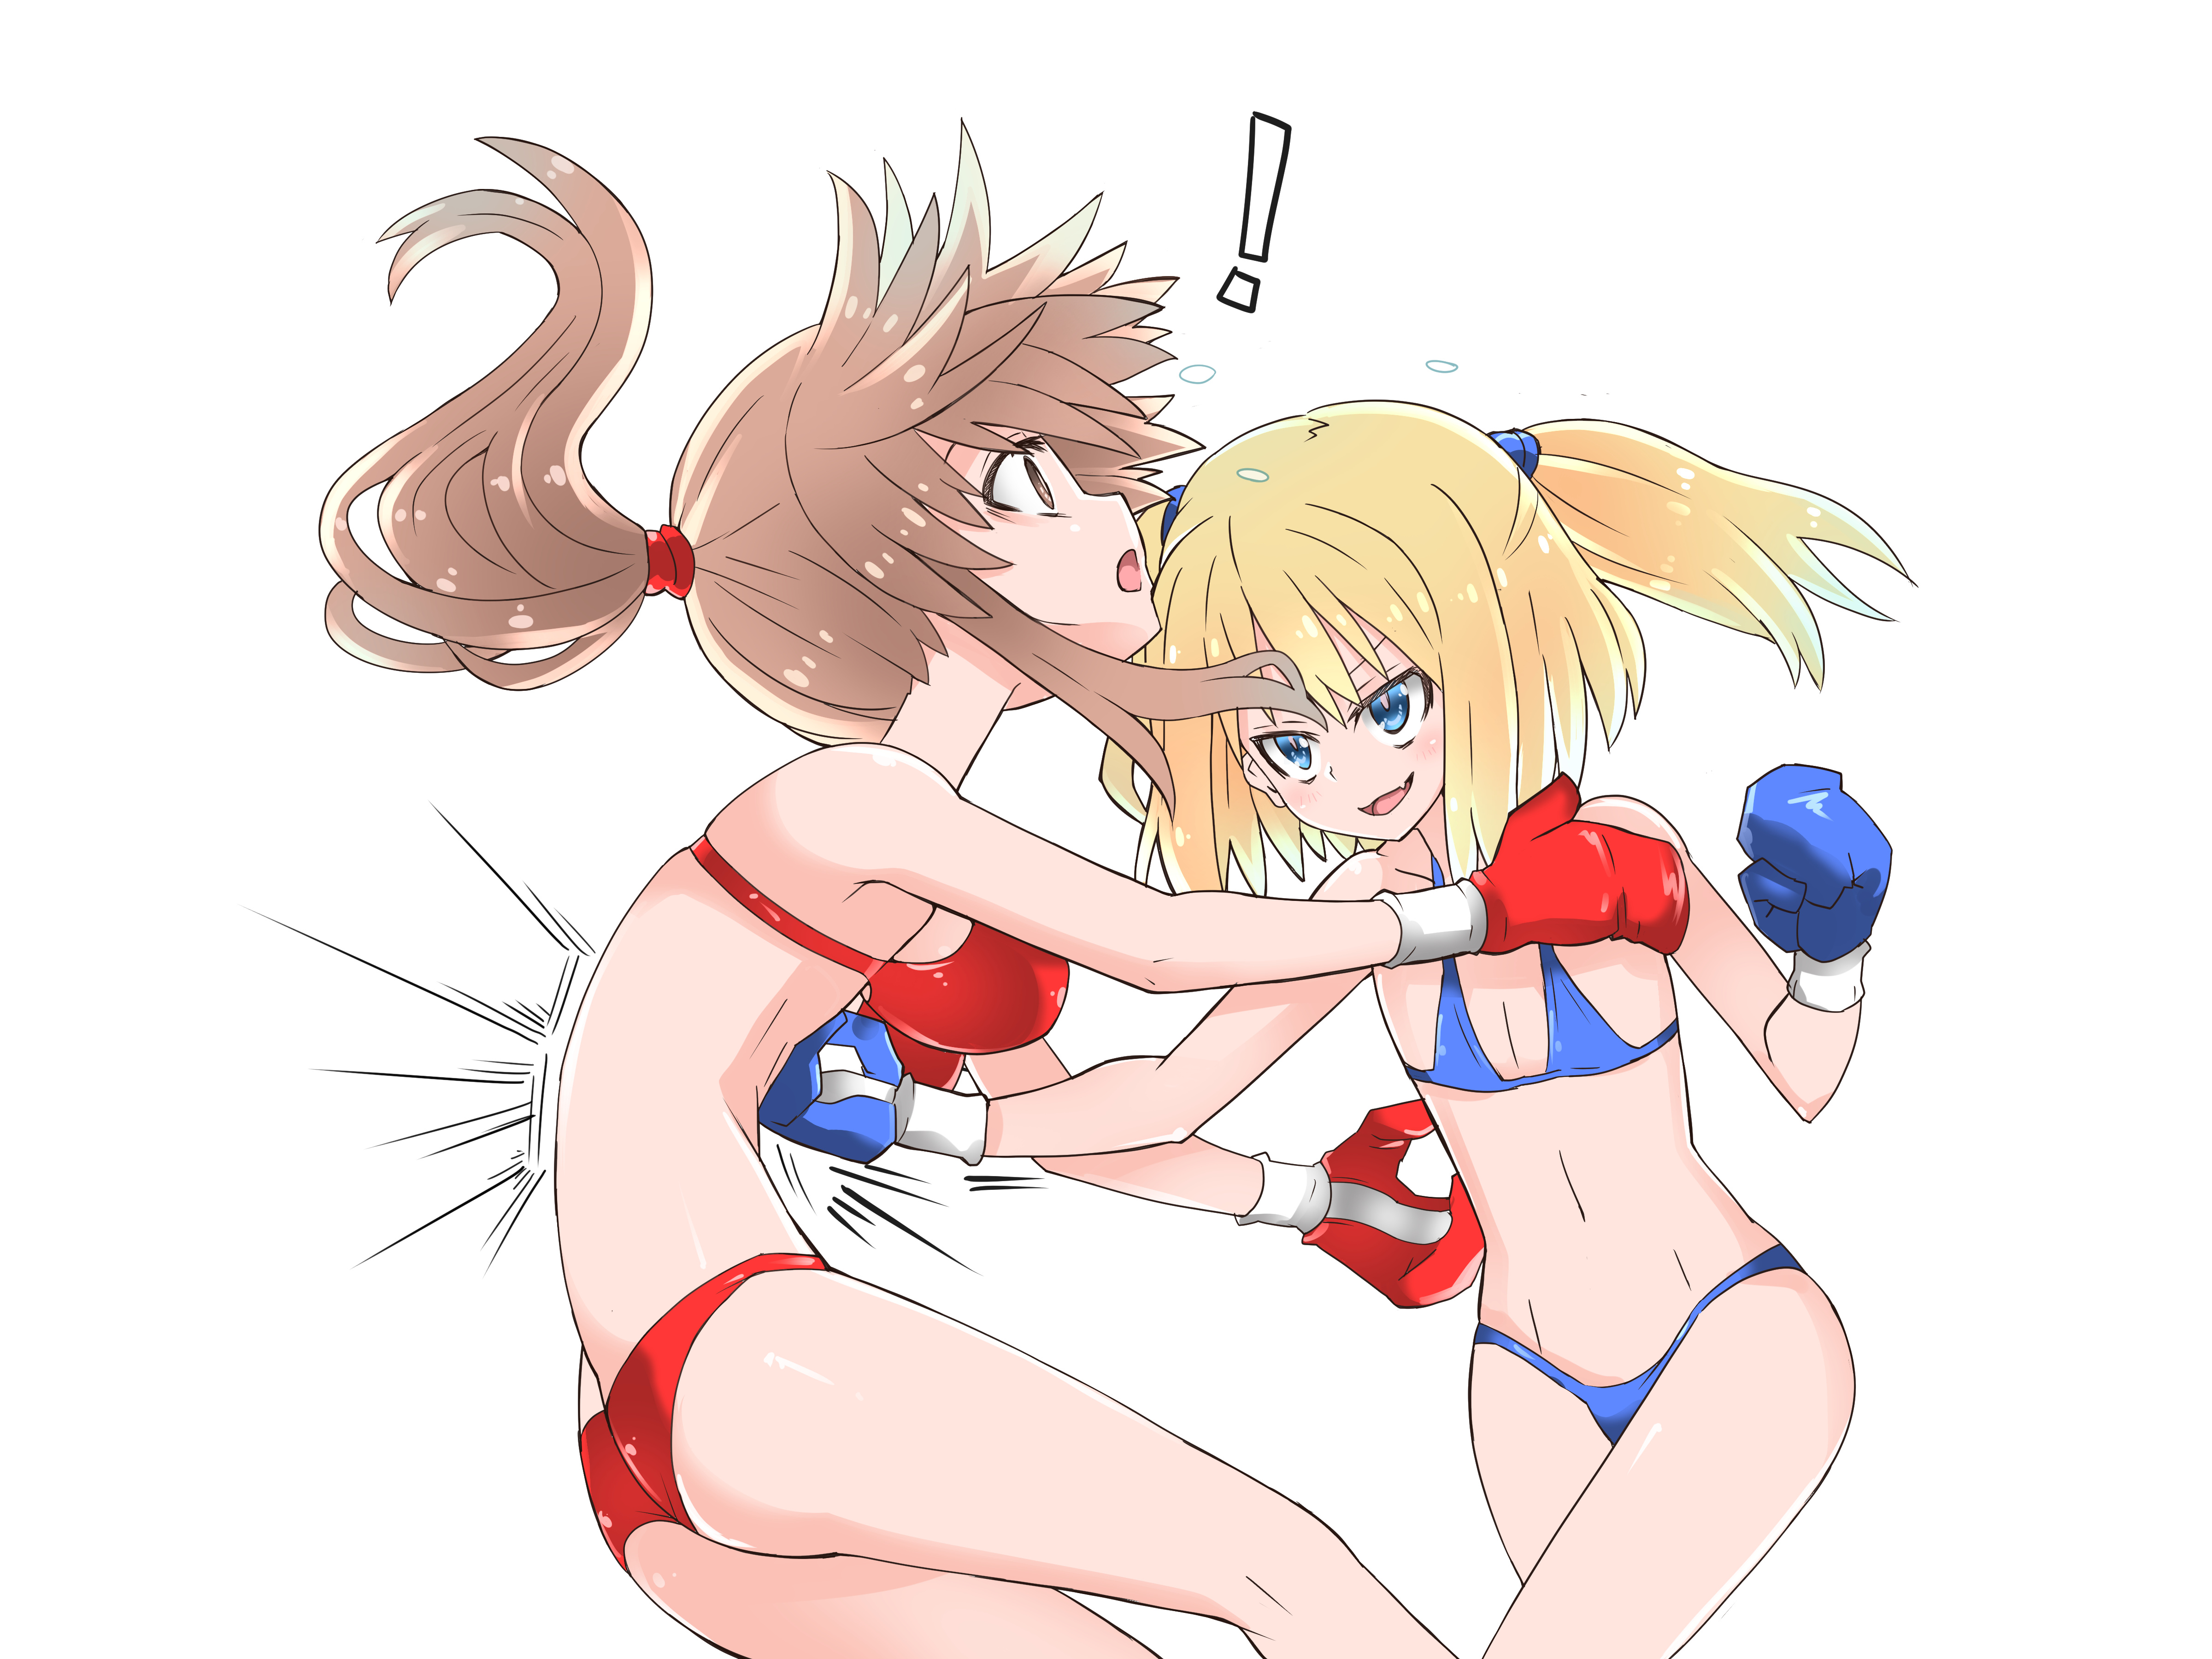 Belly punch ryona